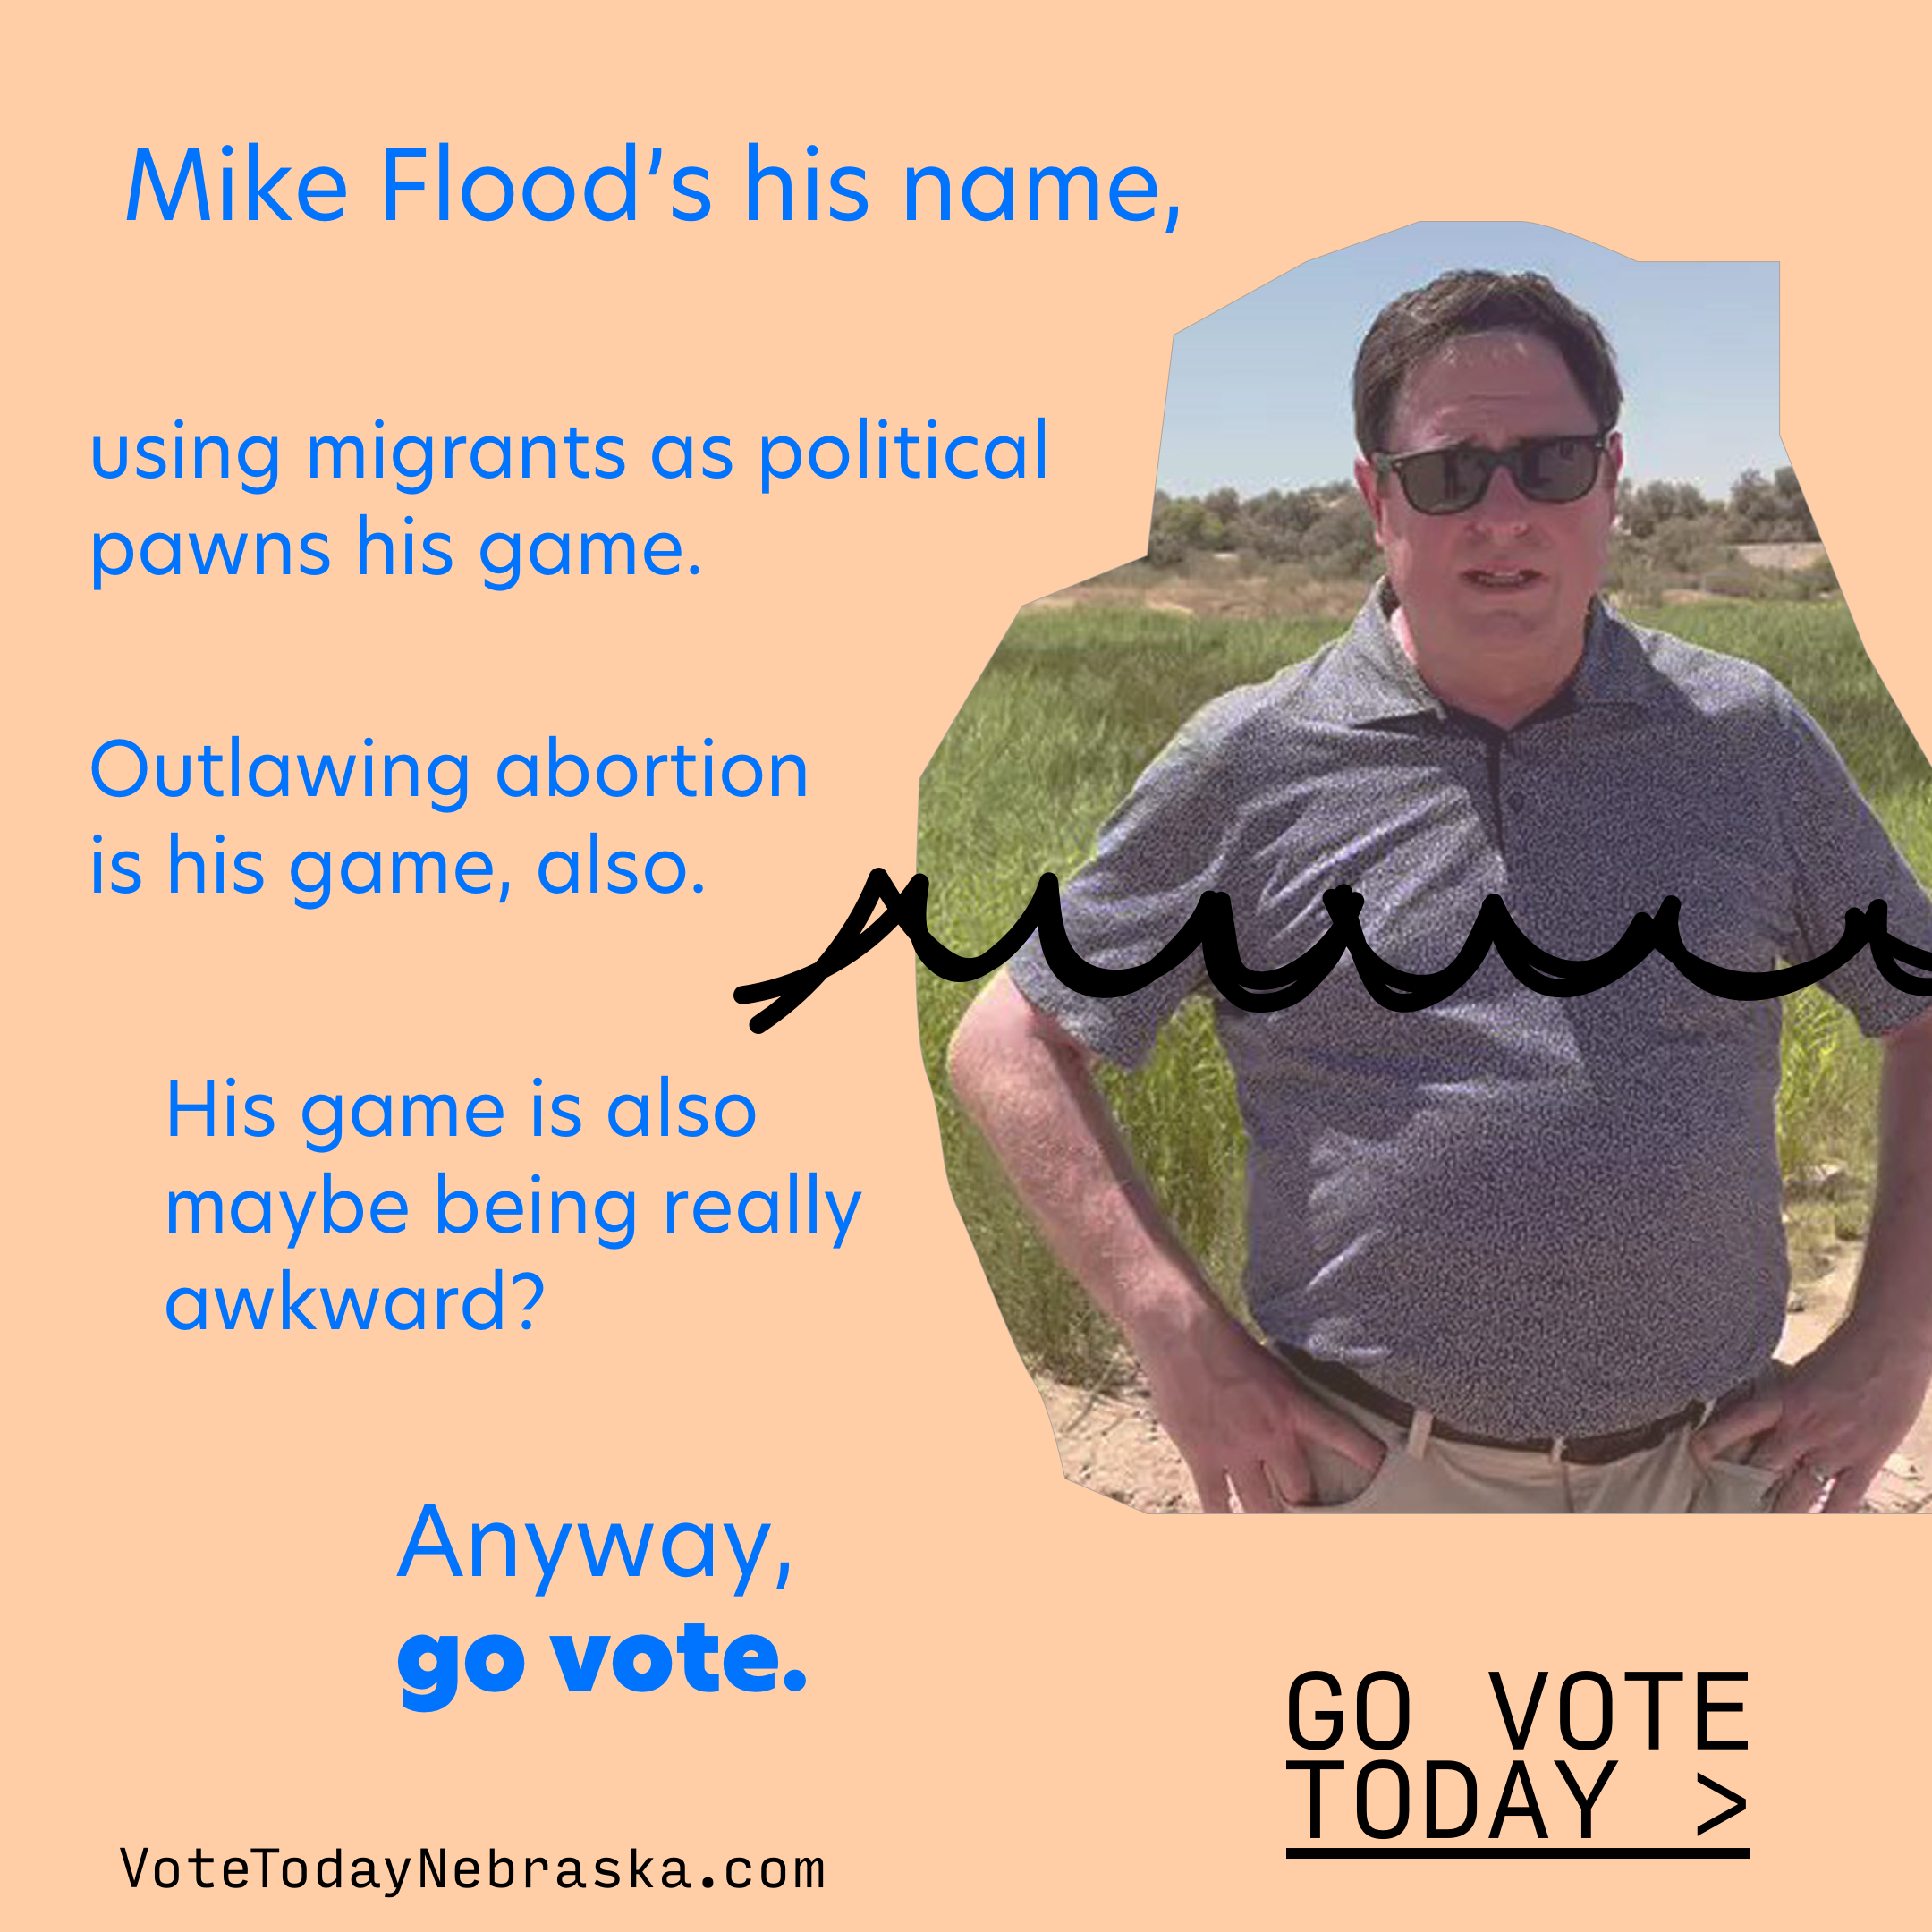 Photo of hot Mike Flood. Mike Flood's his name, using migrants as political pawns his game. Outlawing abortion is his game, also. His game is also maybe being really awkward? Anyway, go vote. Go Vote Today >